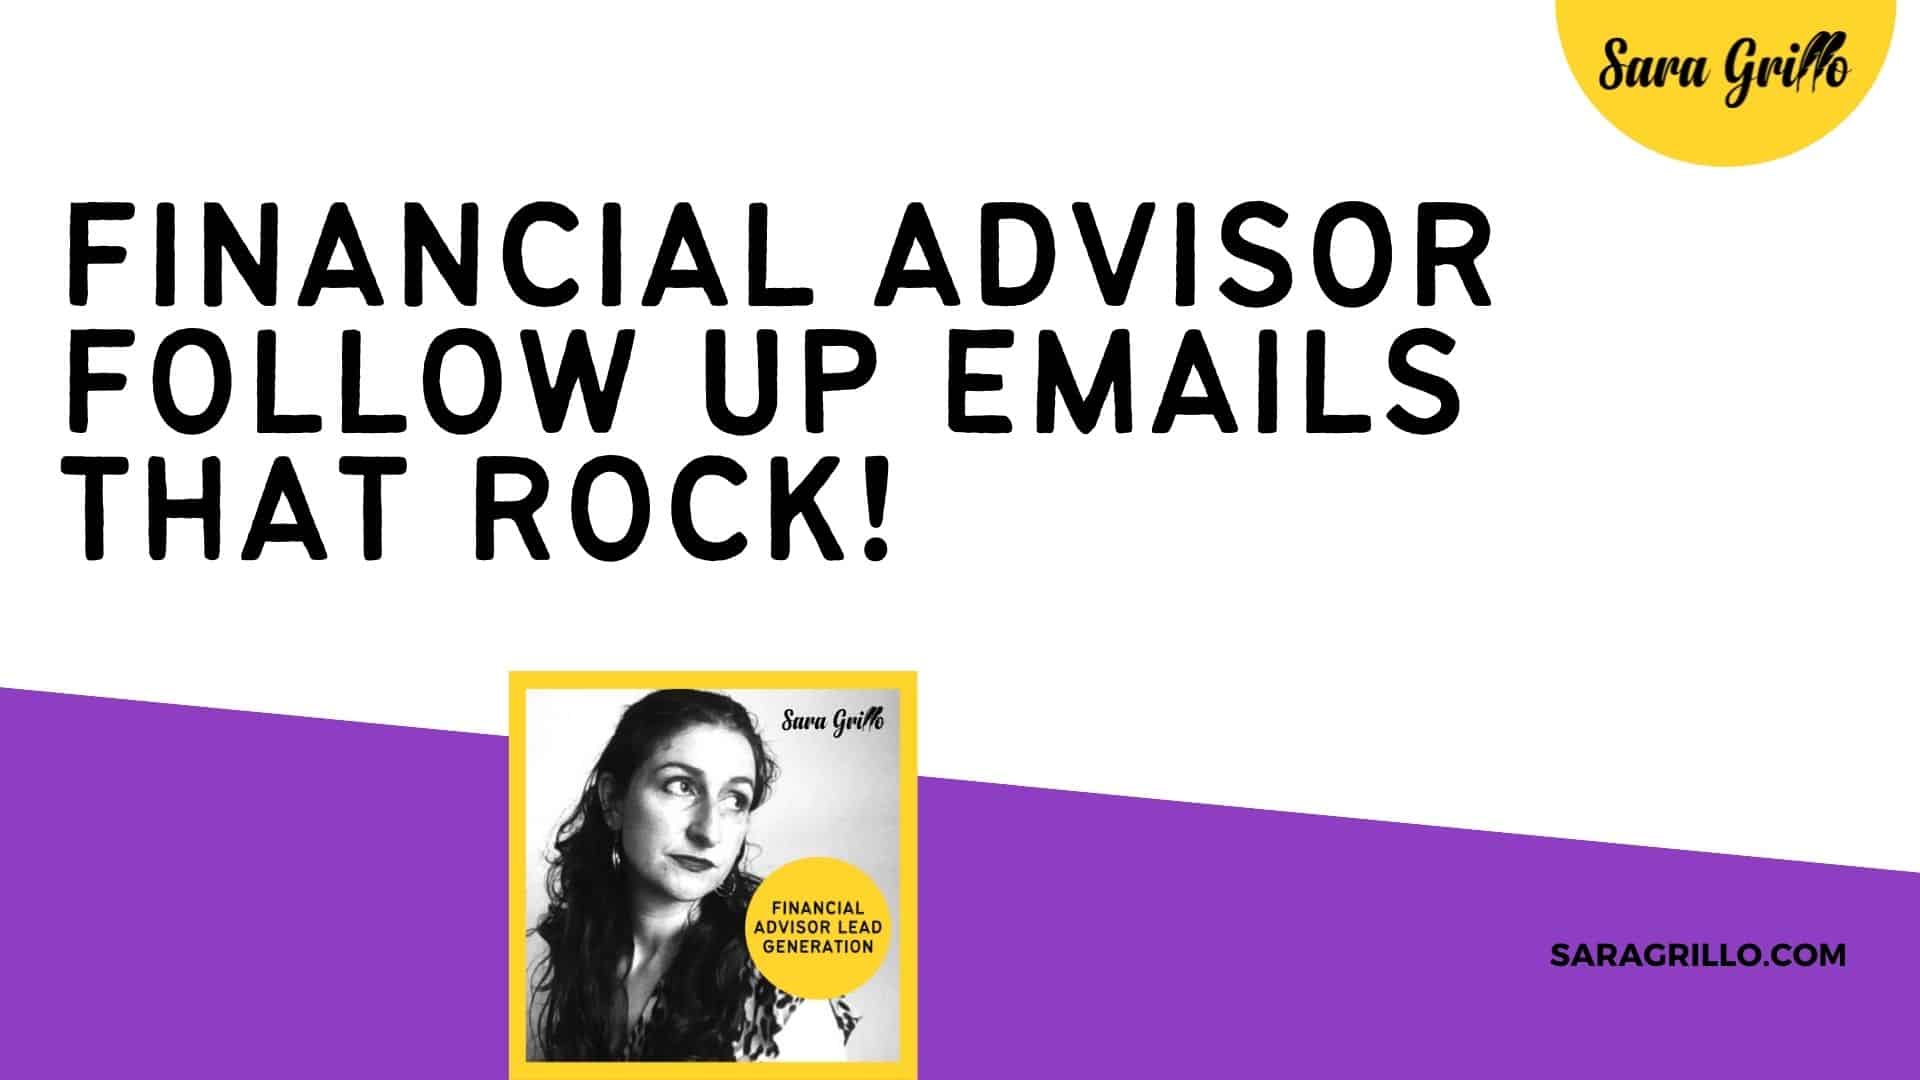 In this podcast we discuss financial advisor followup emails and present a sample email script a financial advisor can use to follow up with a prospect.